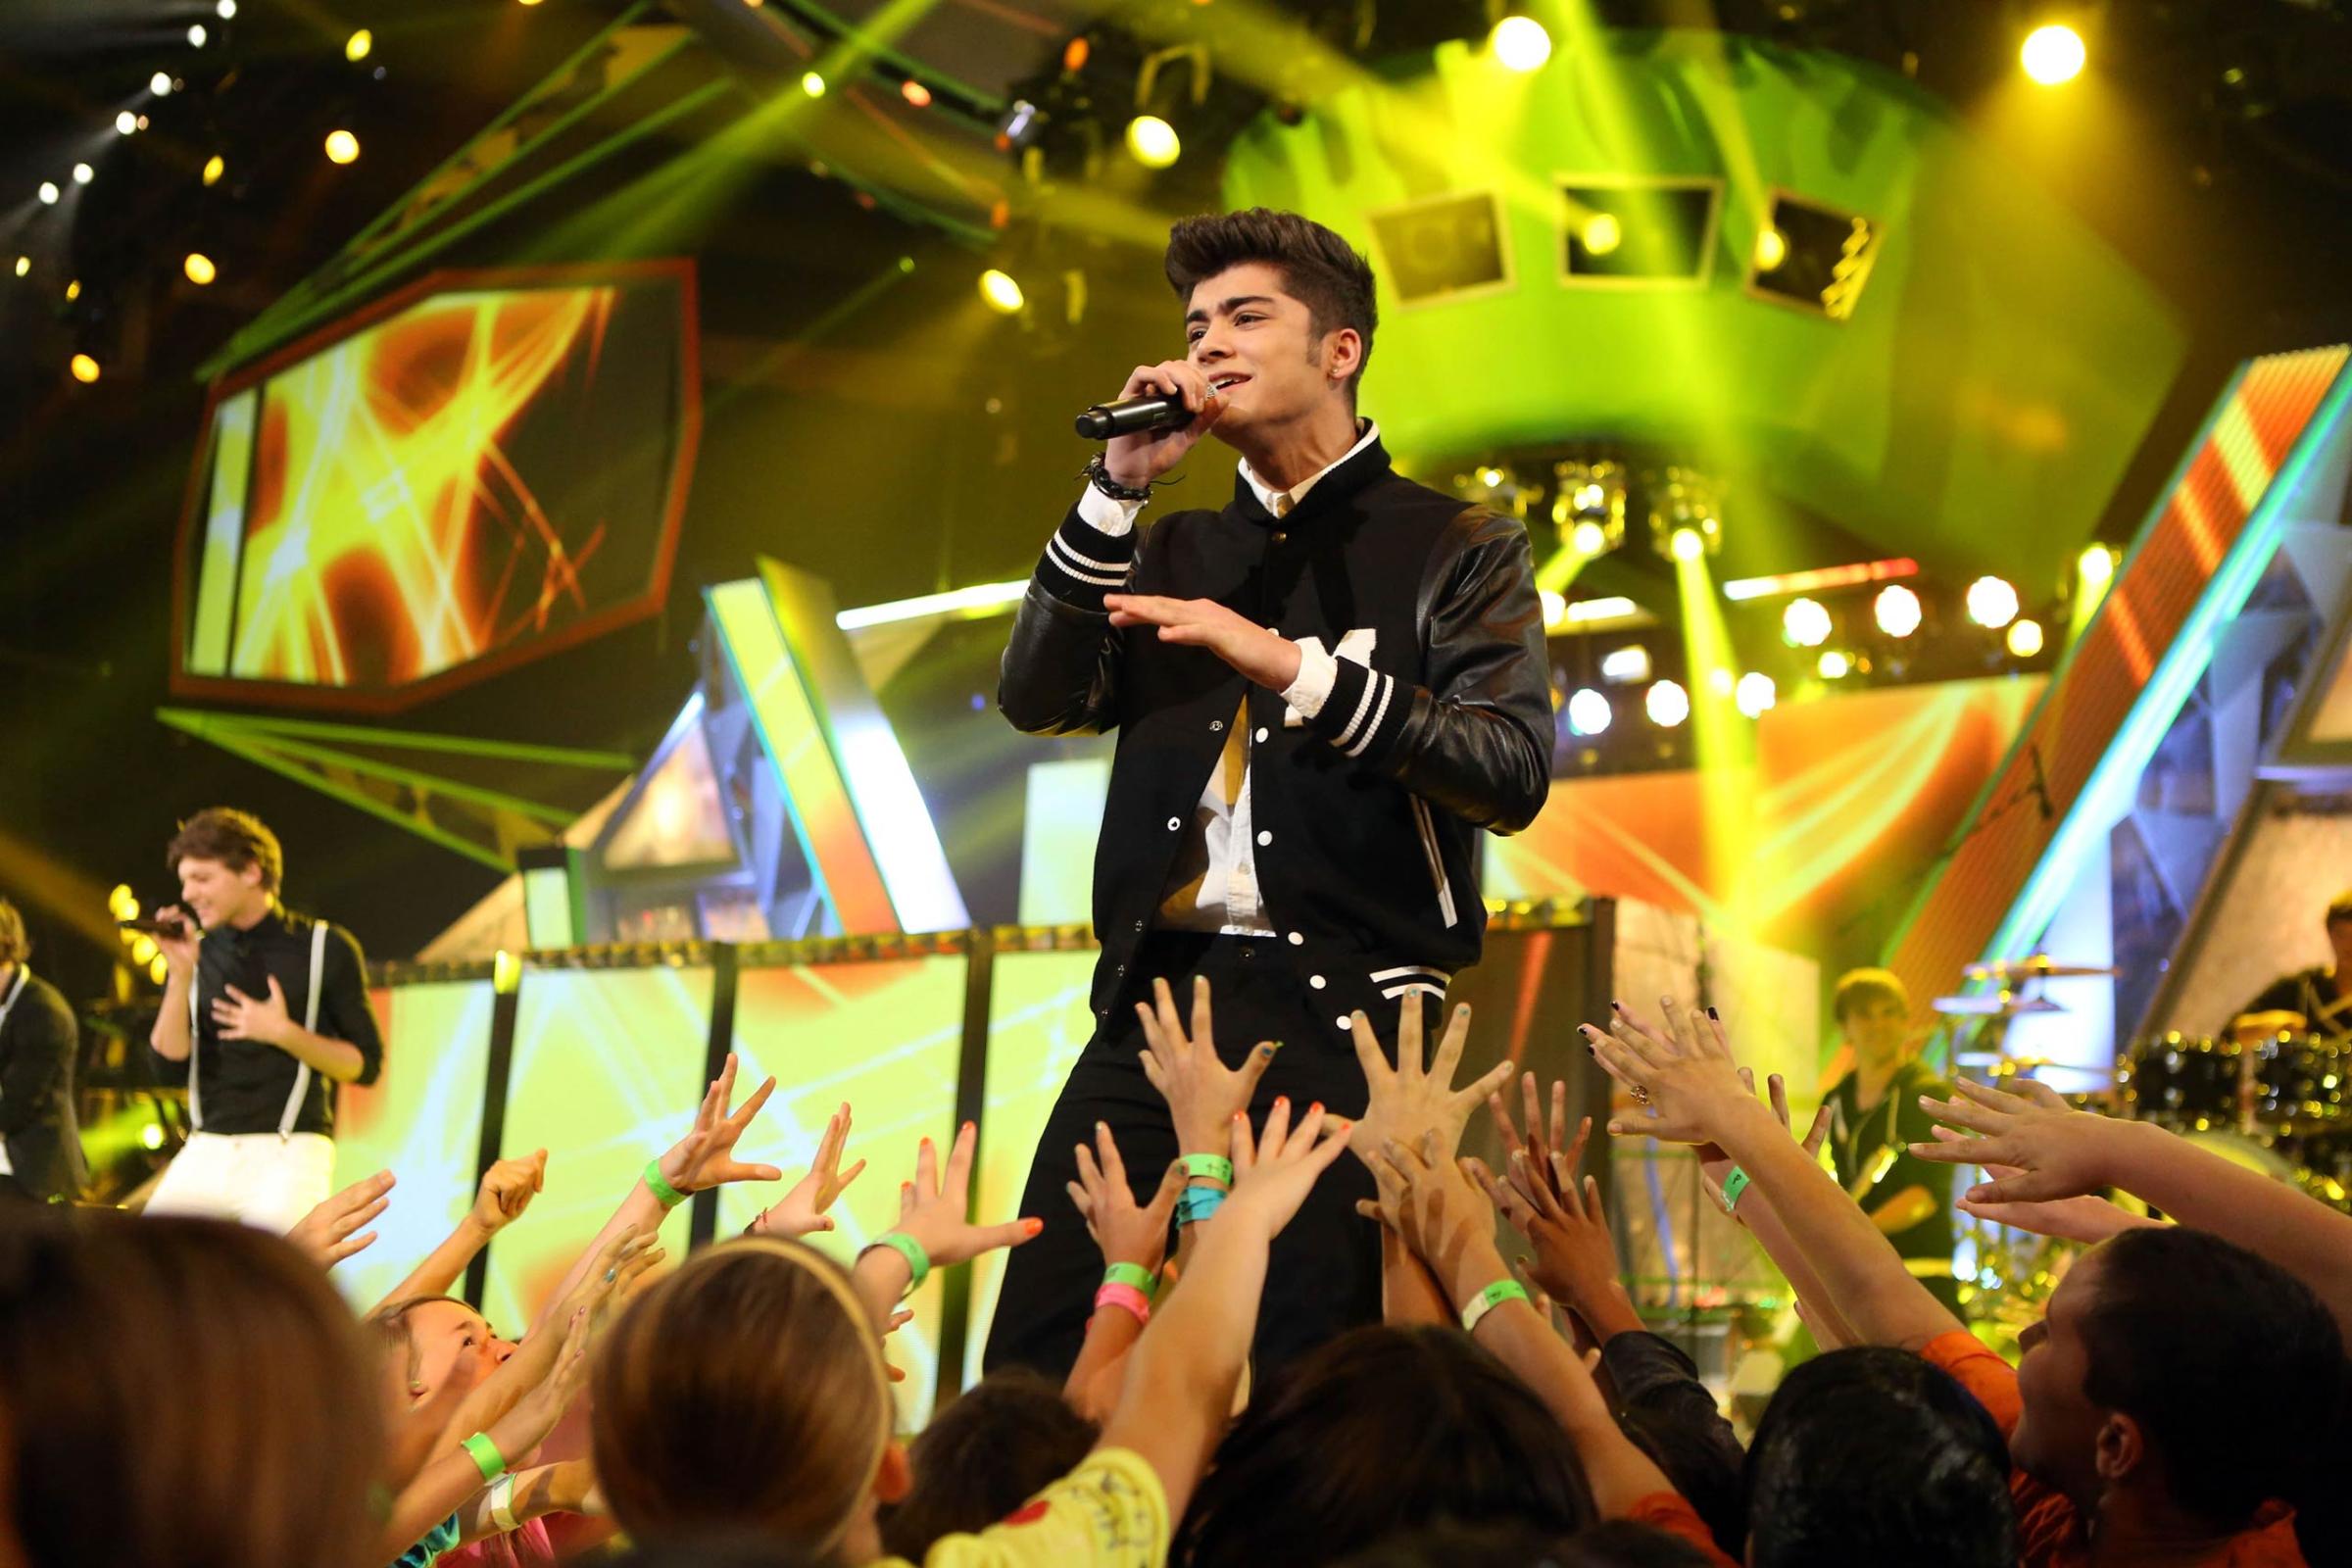 Nickelodeon's 25th Annual Kids' Choice Awards - Roaming Audience